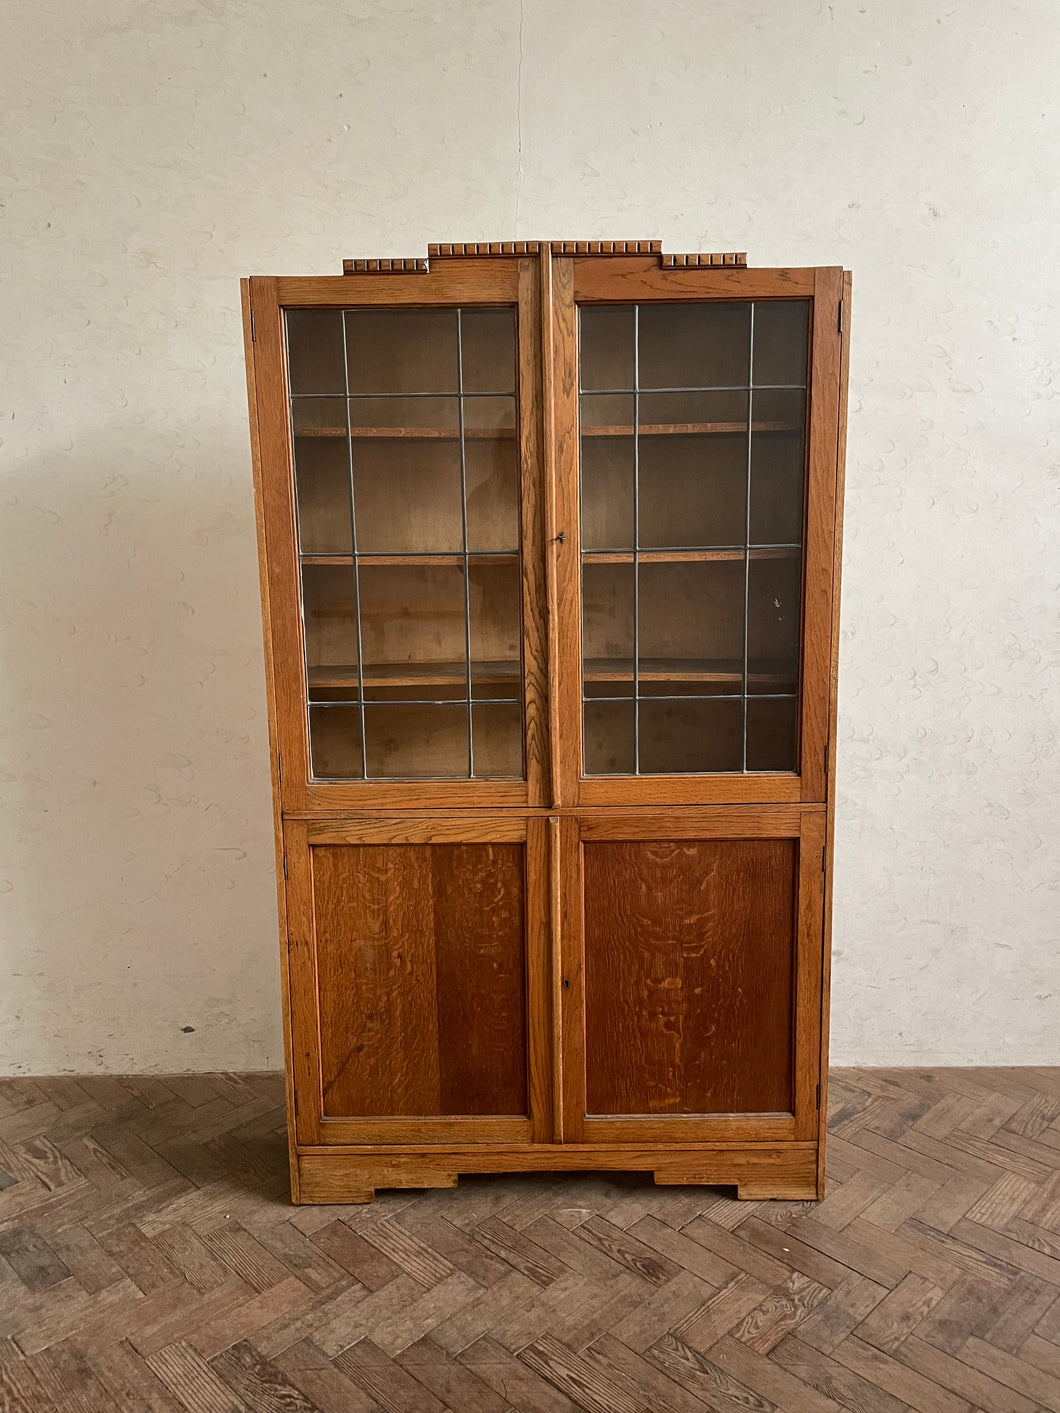 On hold - Large Art Deco Cabinet